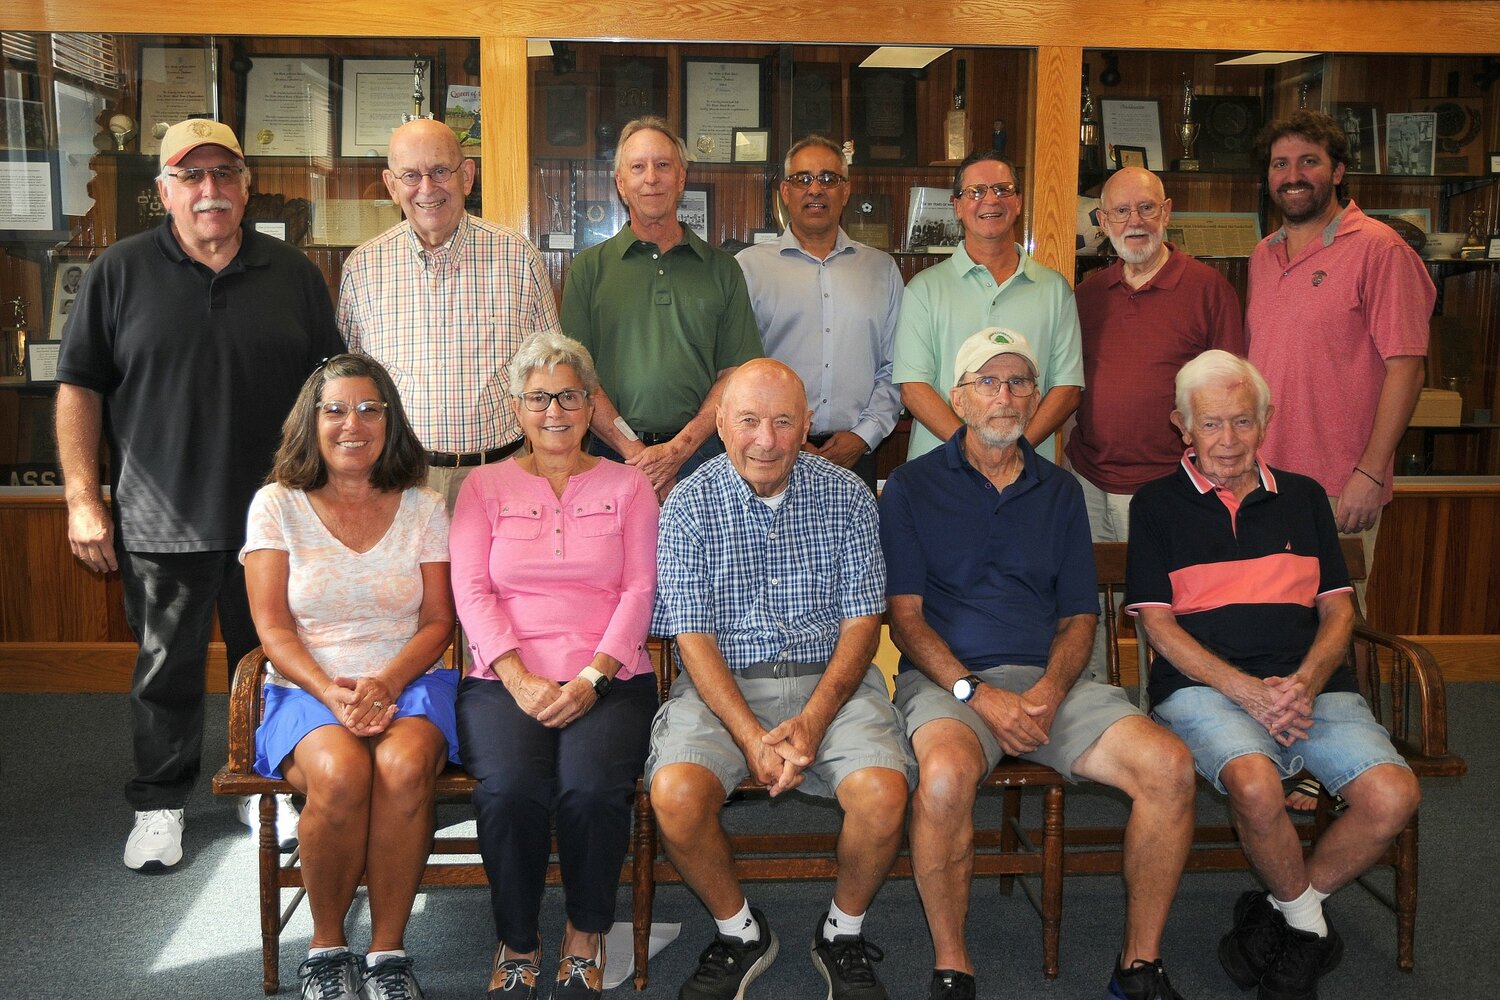 The Warren Athletic Hall of Fame is celebrating its 25th anniversary this year. Seated (l-r) are its committee members: Diane Abbruzzi Gempp, Chairperson Martha Delekta, John Jannitto, Butch Lombardi and Ted Abrain. Standing (l-r) are: Jay Ferreira, Jack Flynn, Jay Barry, Gary Martins, Chuck Connolly, Charlie Francis, and Matt Oliveira, grandson of founder Pete Sepe. Not present are Joe Catalfano, Jim McMahon and Al Sweet.